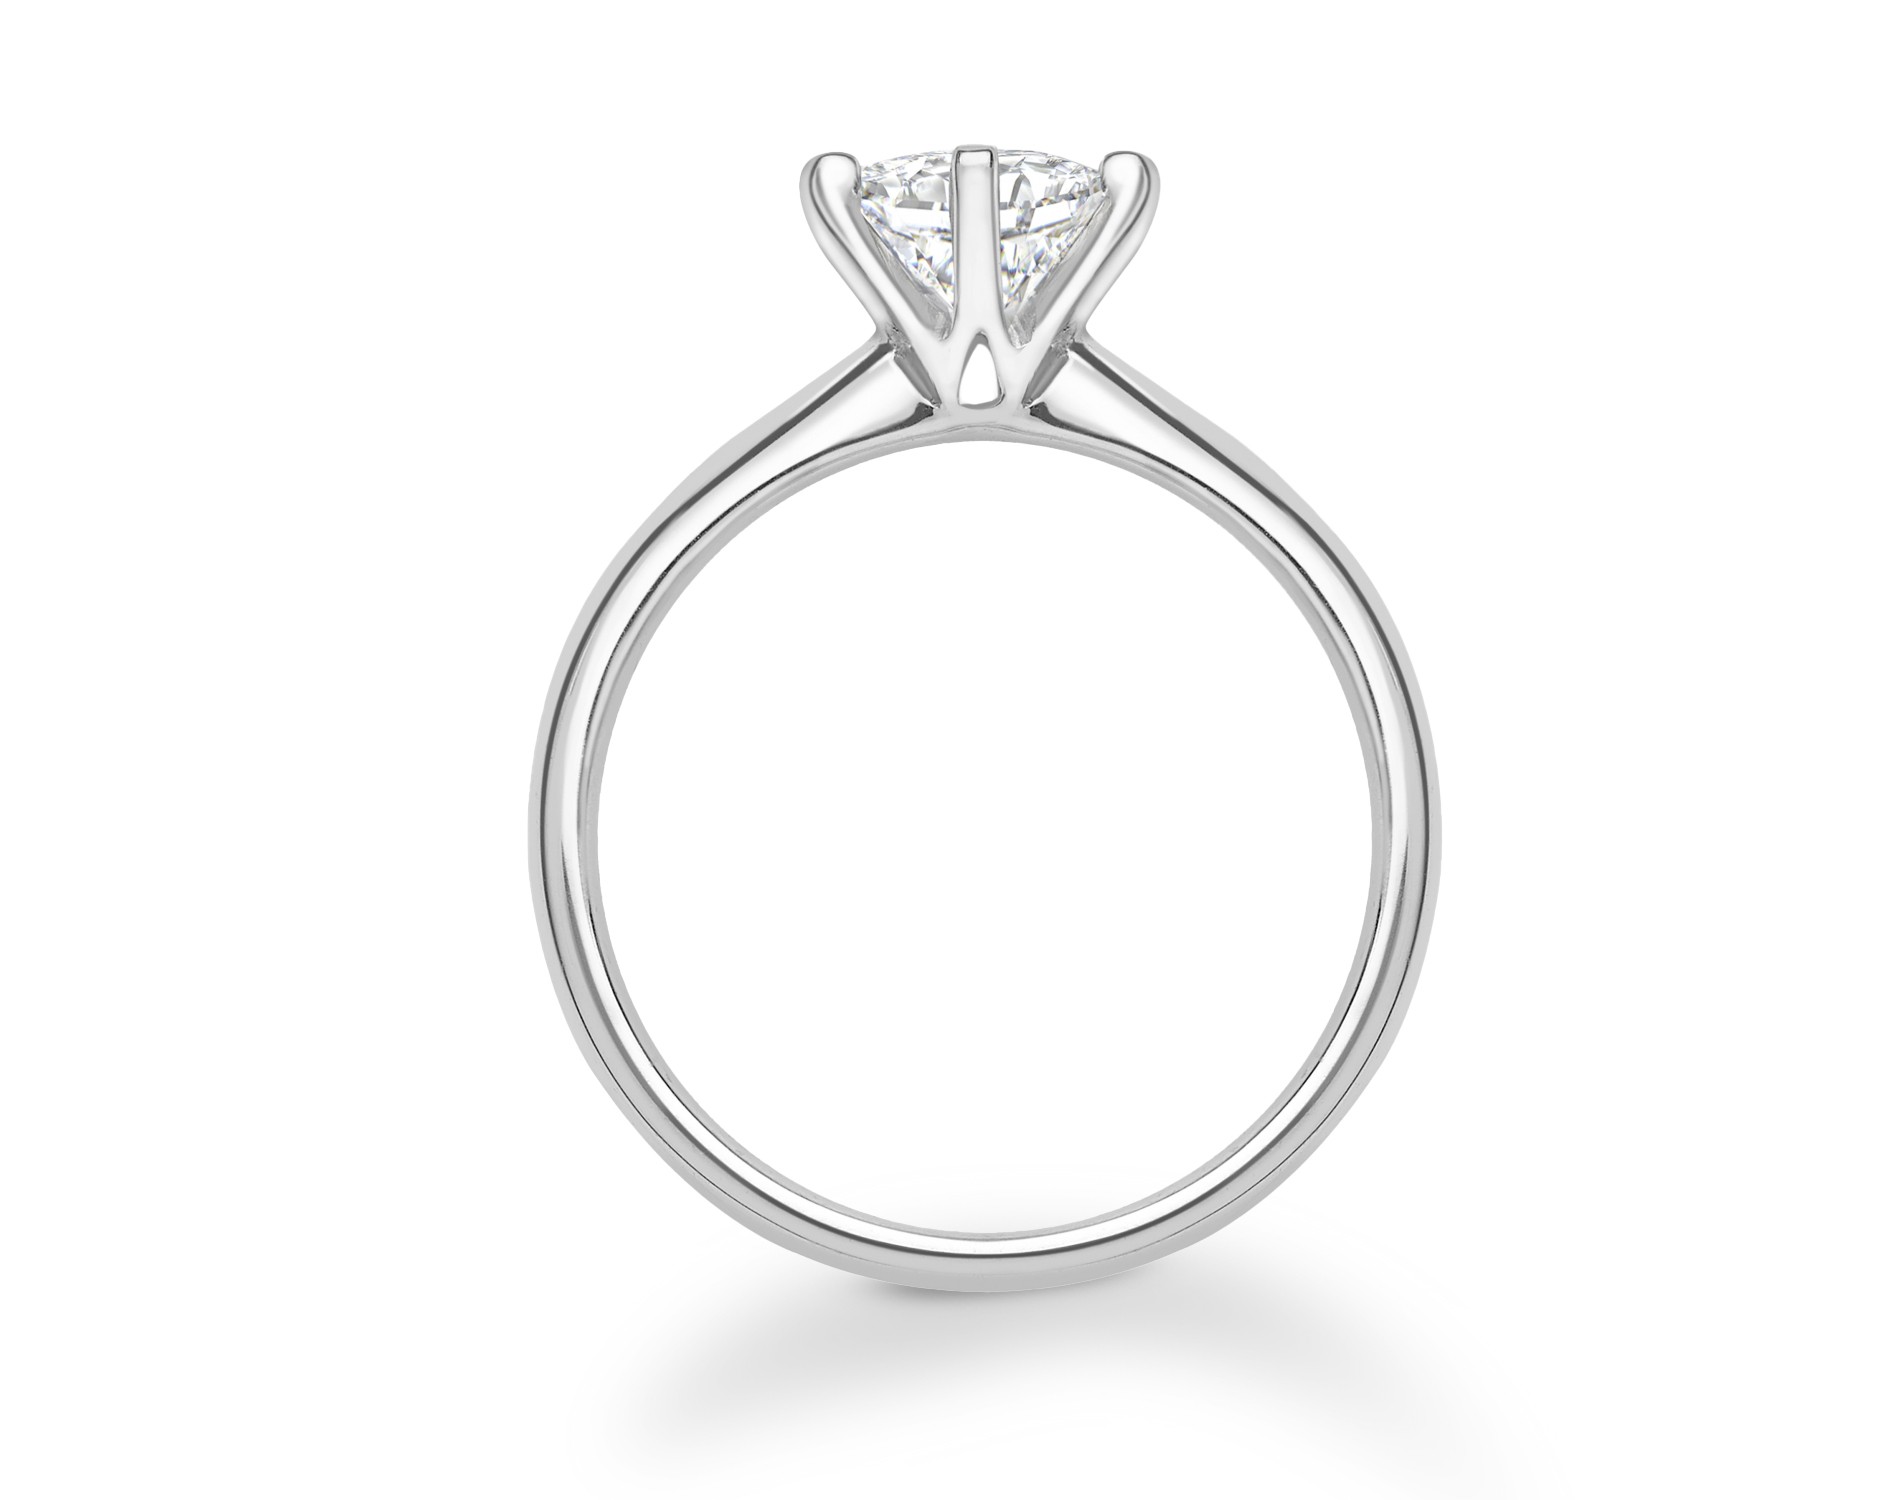 18K WHITE GOLD 6 PRONGS SOLITAIRE ROUND CUT DIAMOND ENGAGEMENT RING